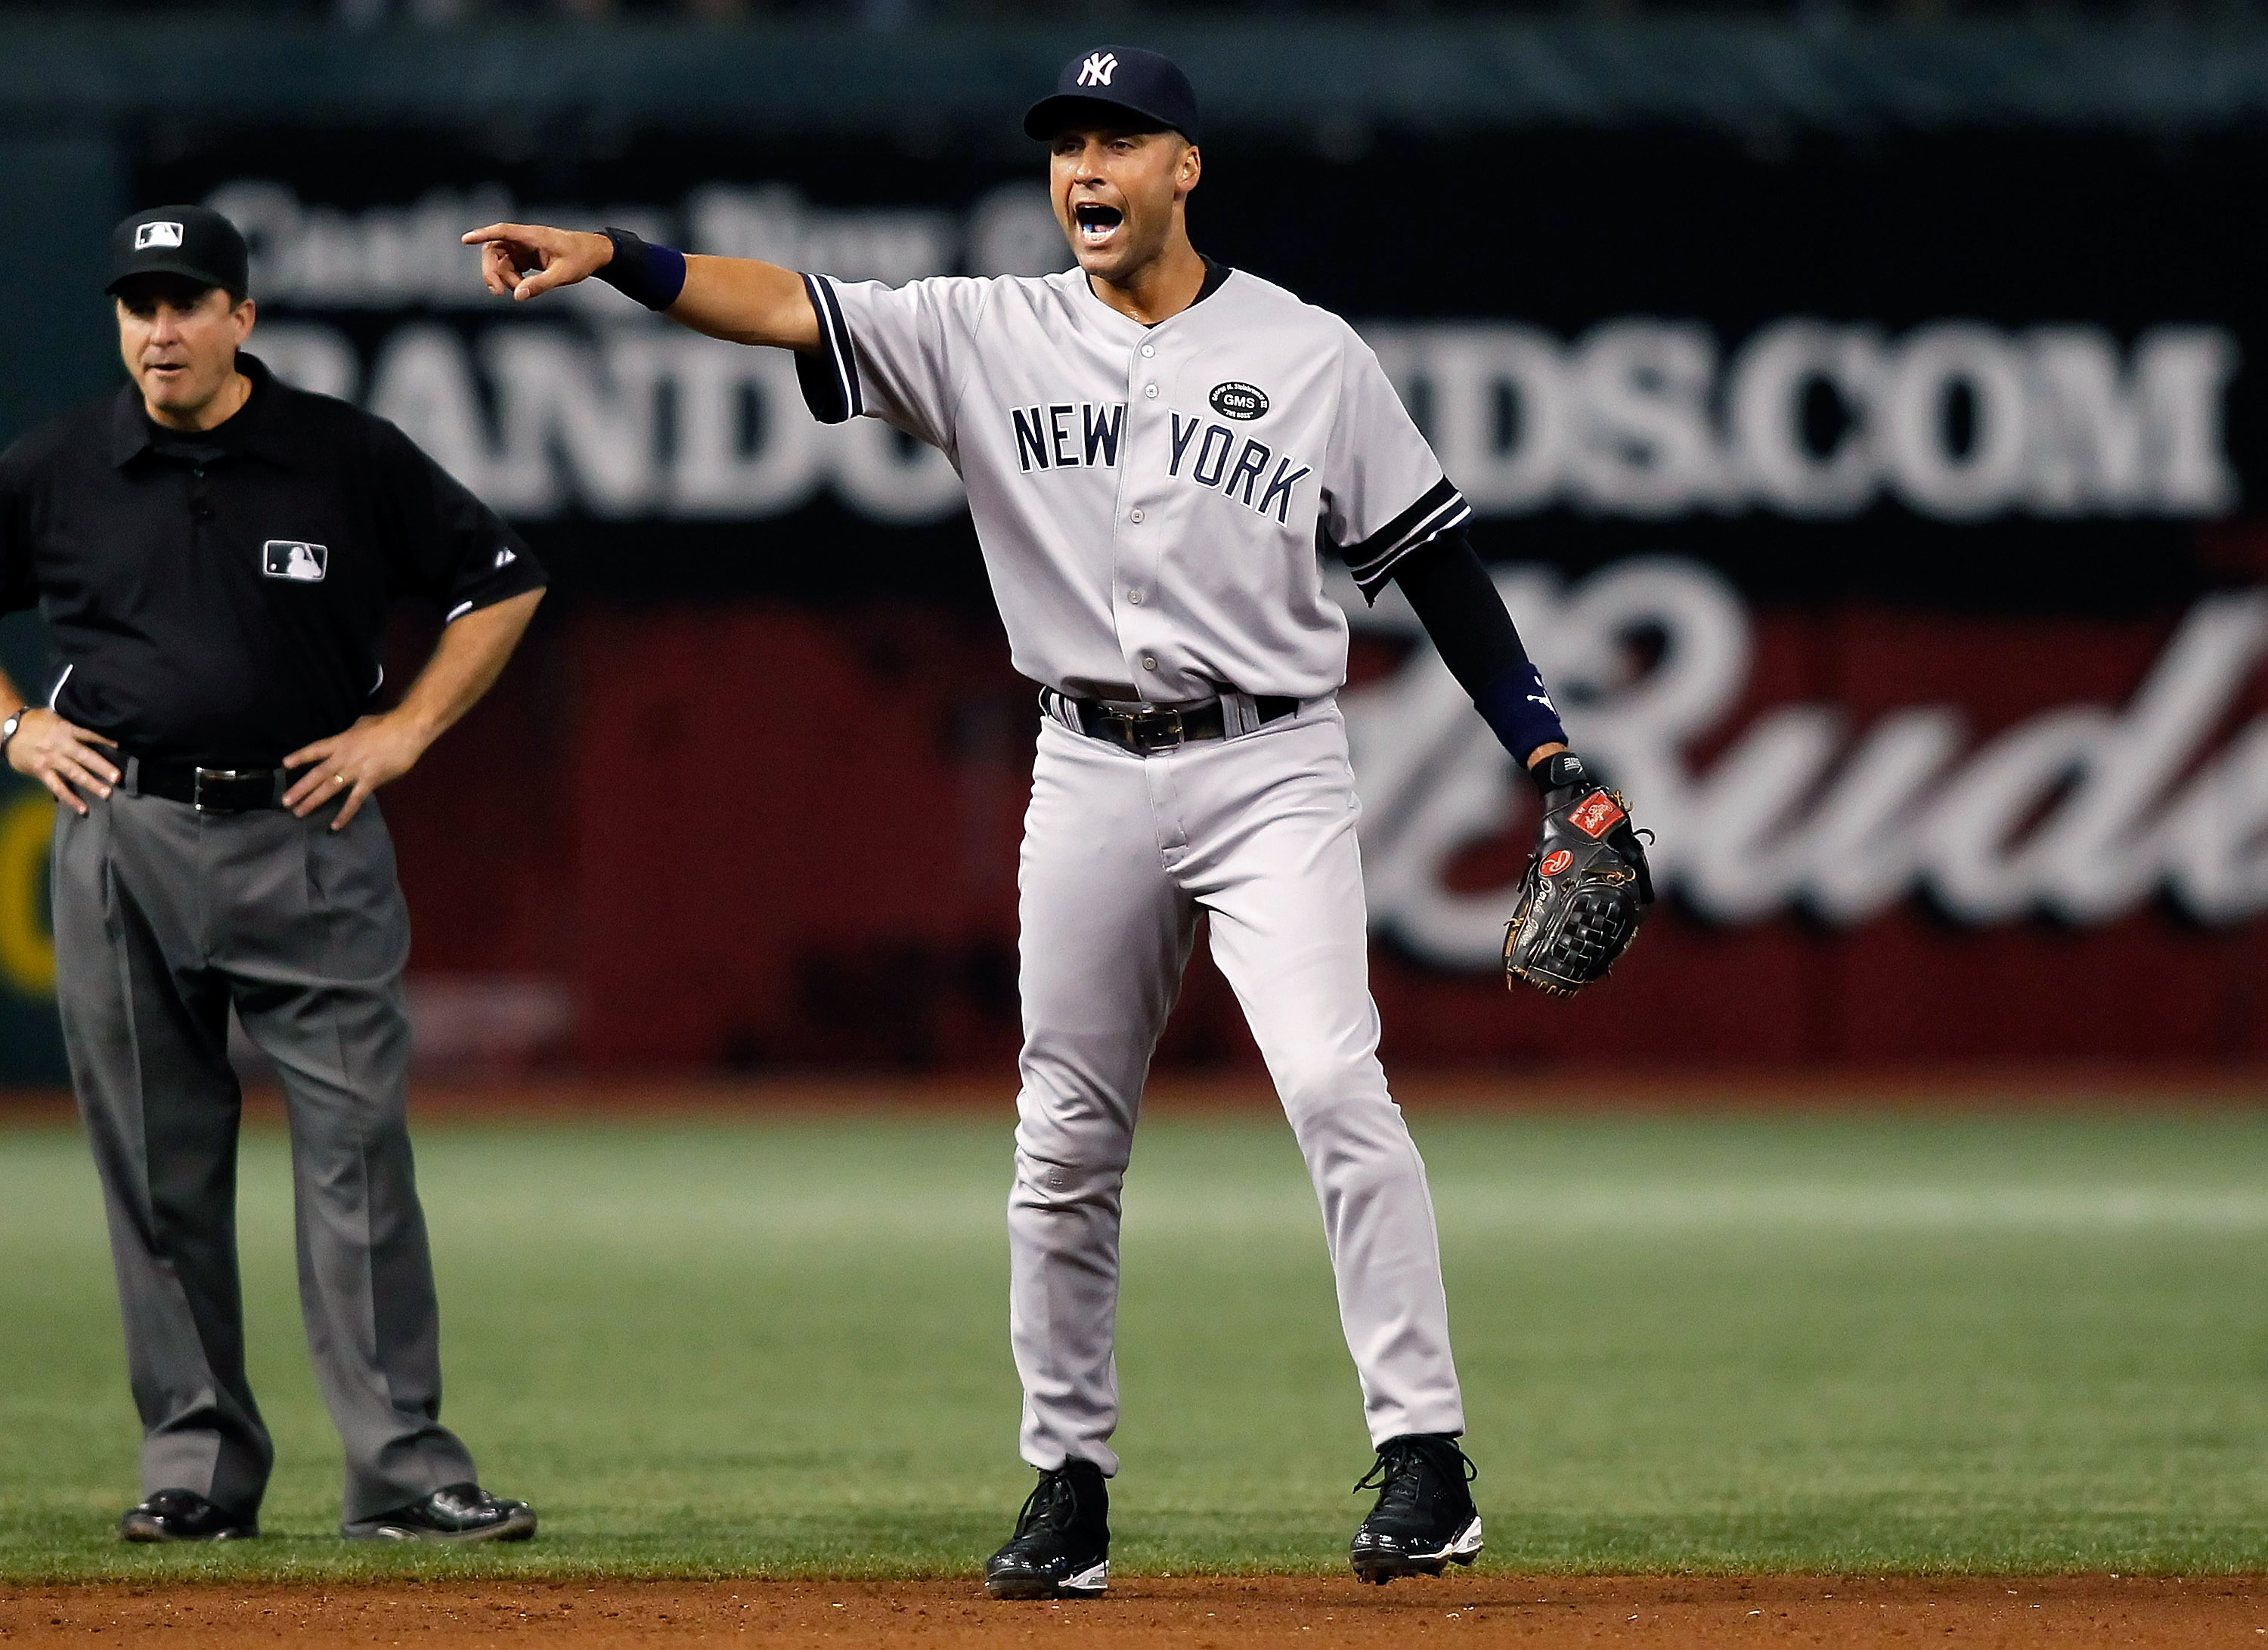 ST. PETERSBURG, FL - SEPTEMBER 14:  Infielder Derek Jeter #2 of the New York Yankees shouts for help from the umpire against the Tampa Bay Rays during the game at Tropicana Field on September 14, 2010 in St. Petersburg, Florida.  (Photo by J. Meric/Getty 